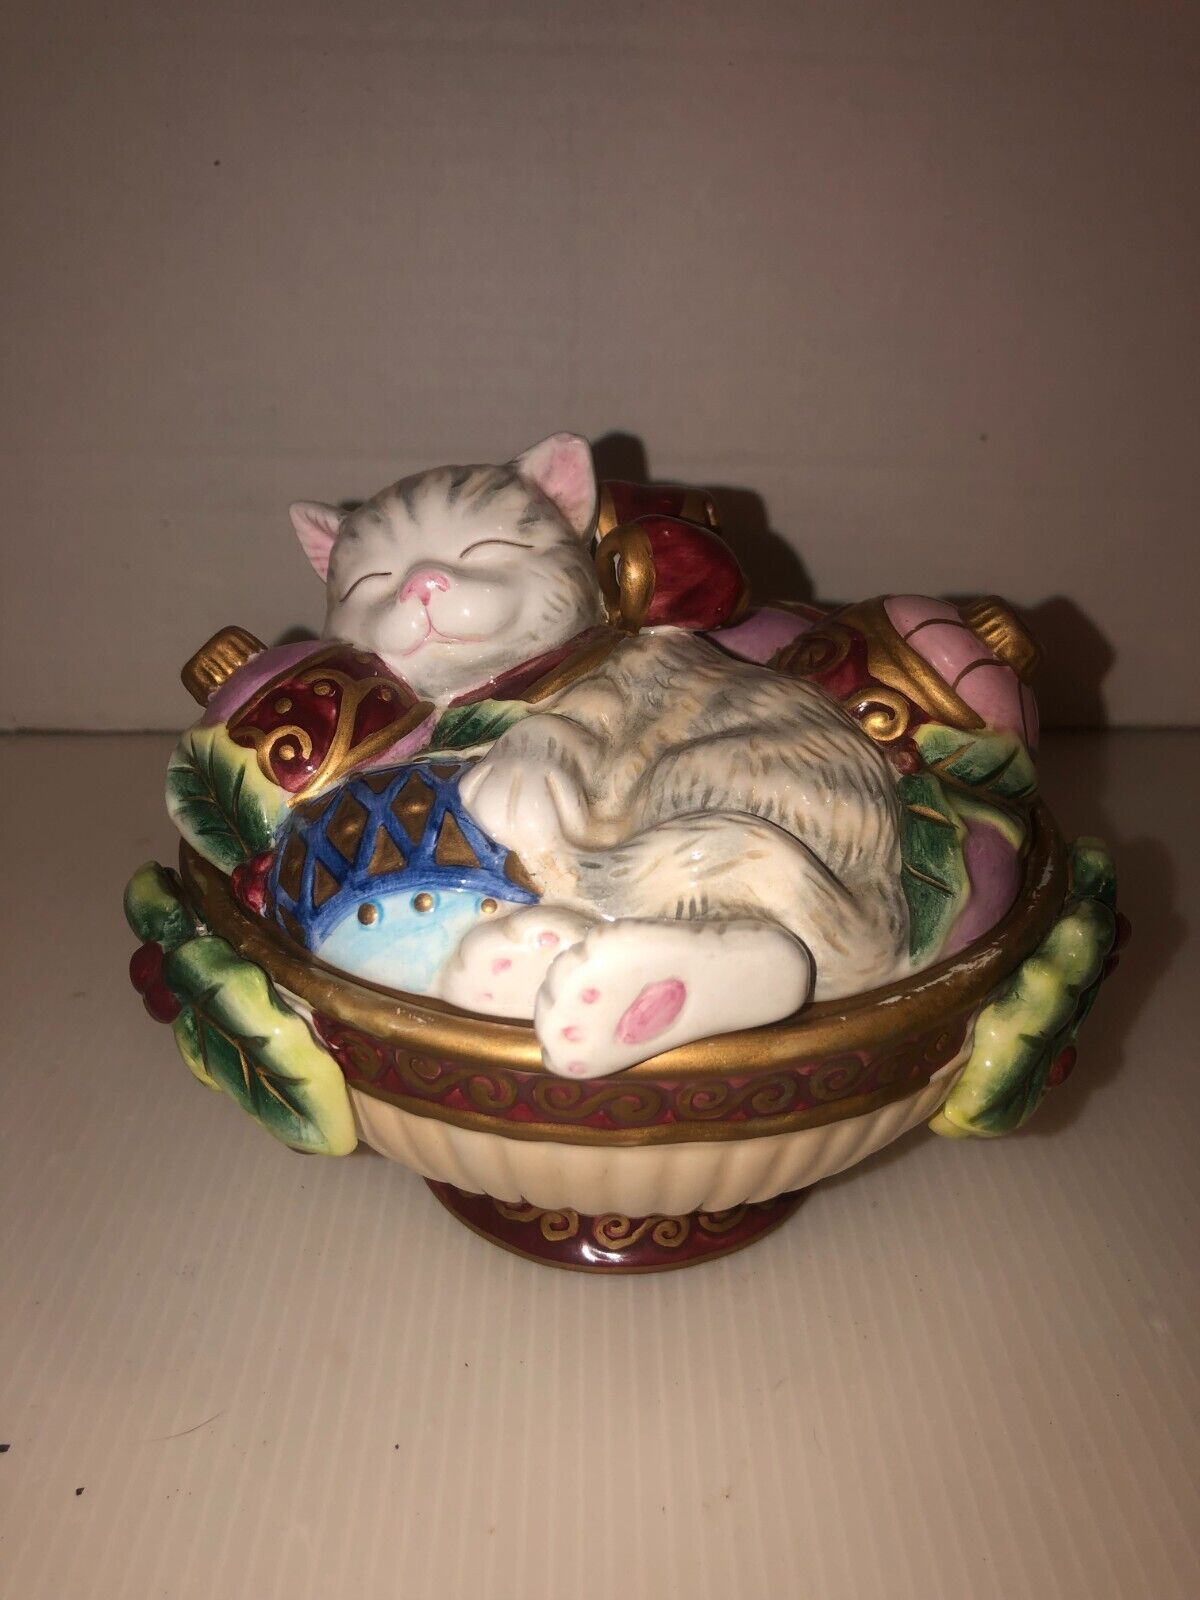 Cute Fitz and Floyd Essentials "Kristmas Kitty" Christmas Lidded Candy Dish - $16.95